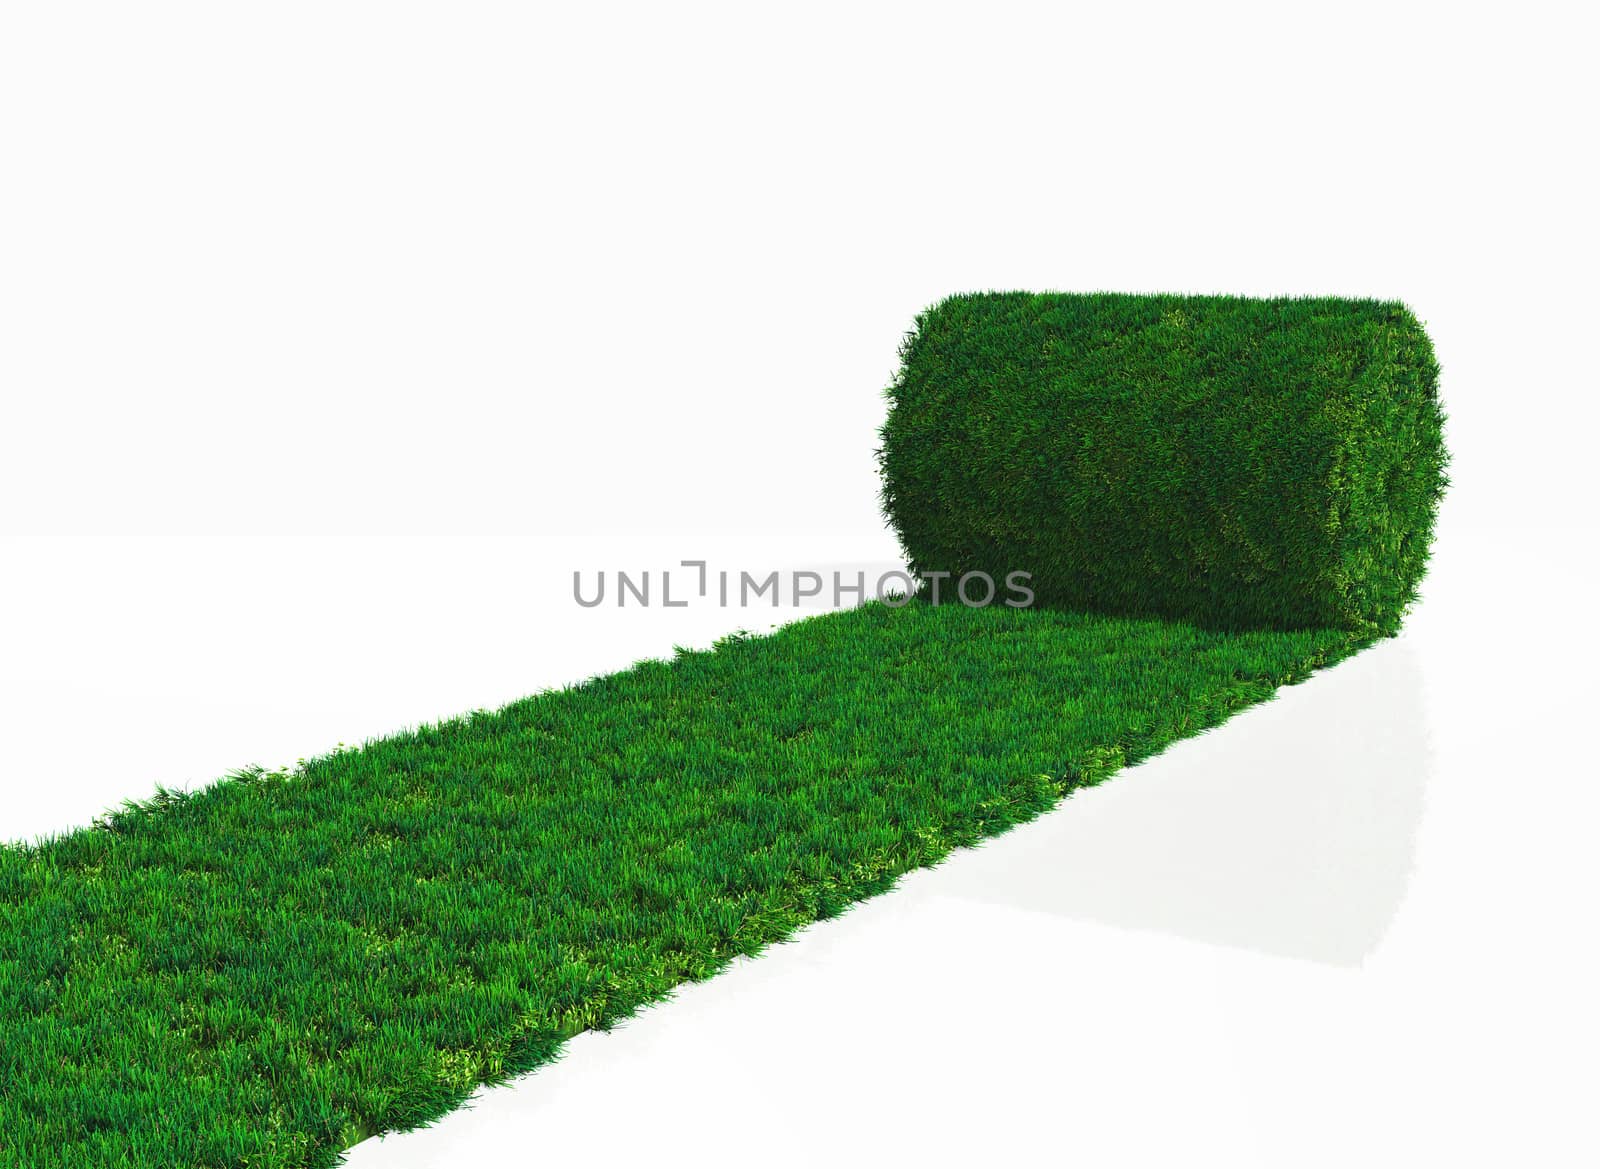 a roll of grass carpet is unrolling in one direction on a white background